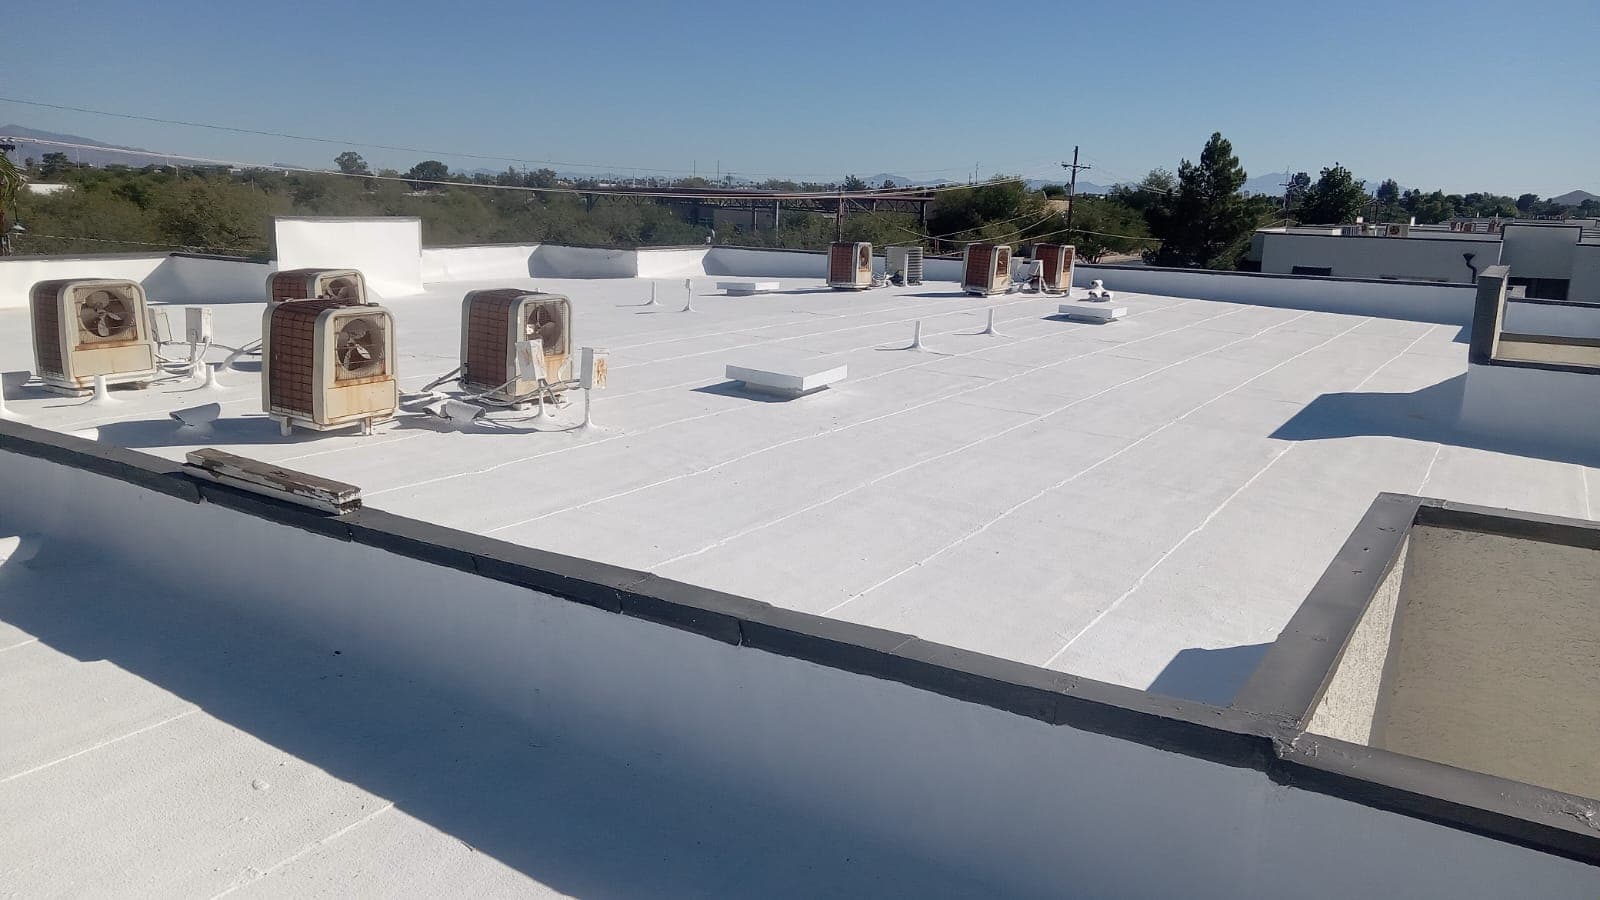 Broad perspective of a Desert Ridge complex after the roof coating session.